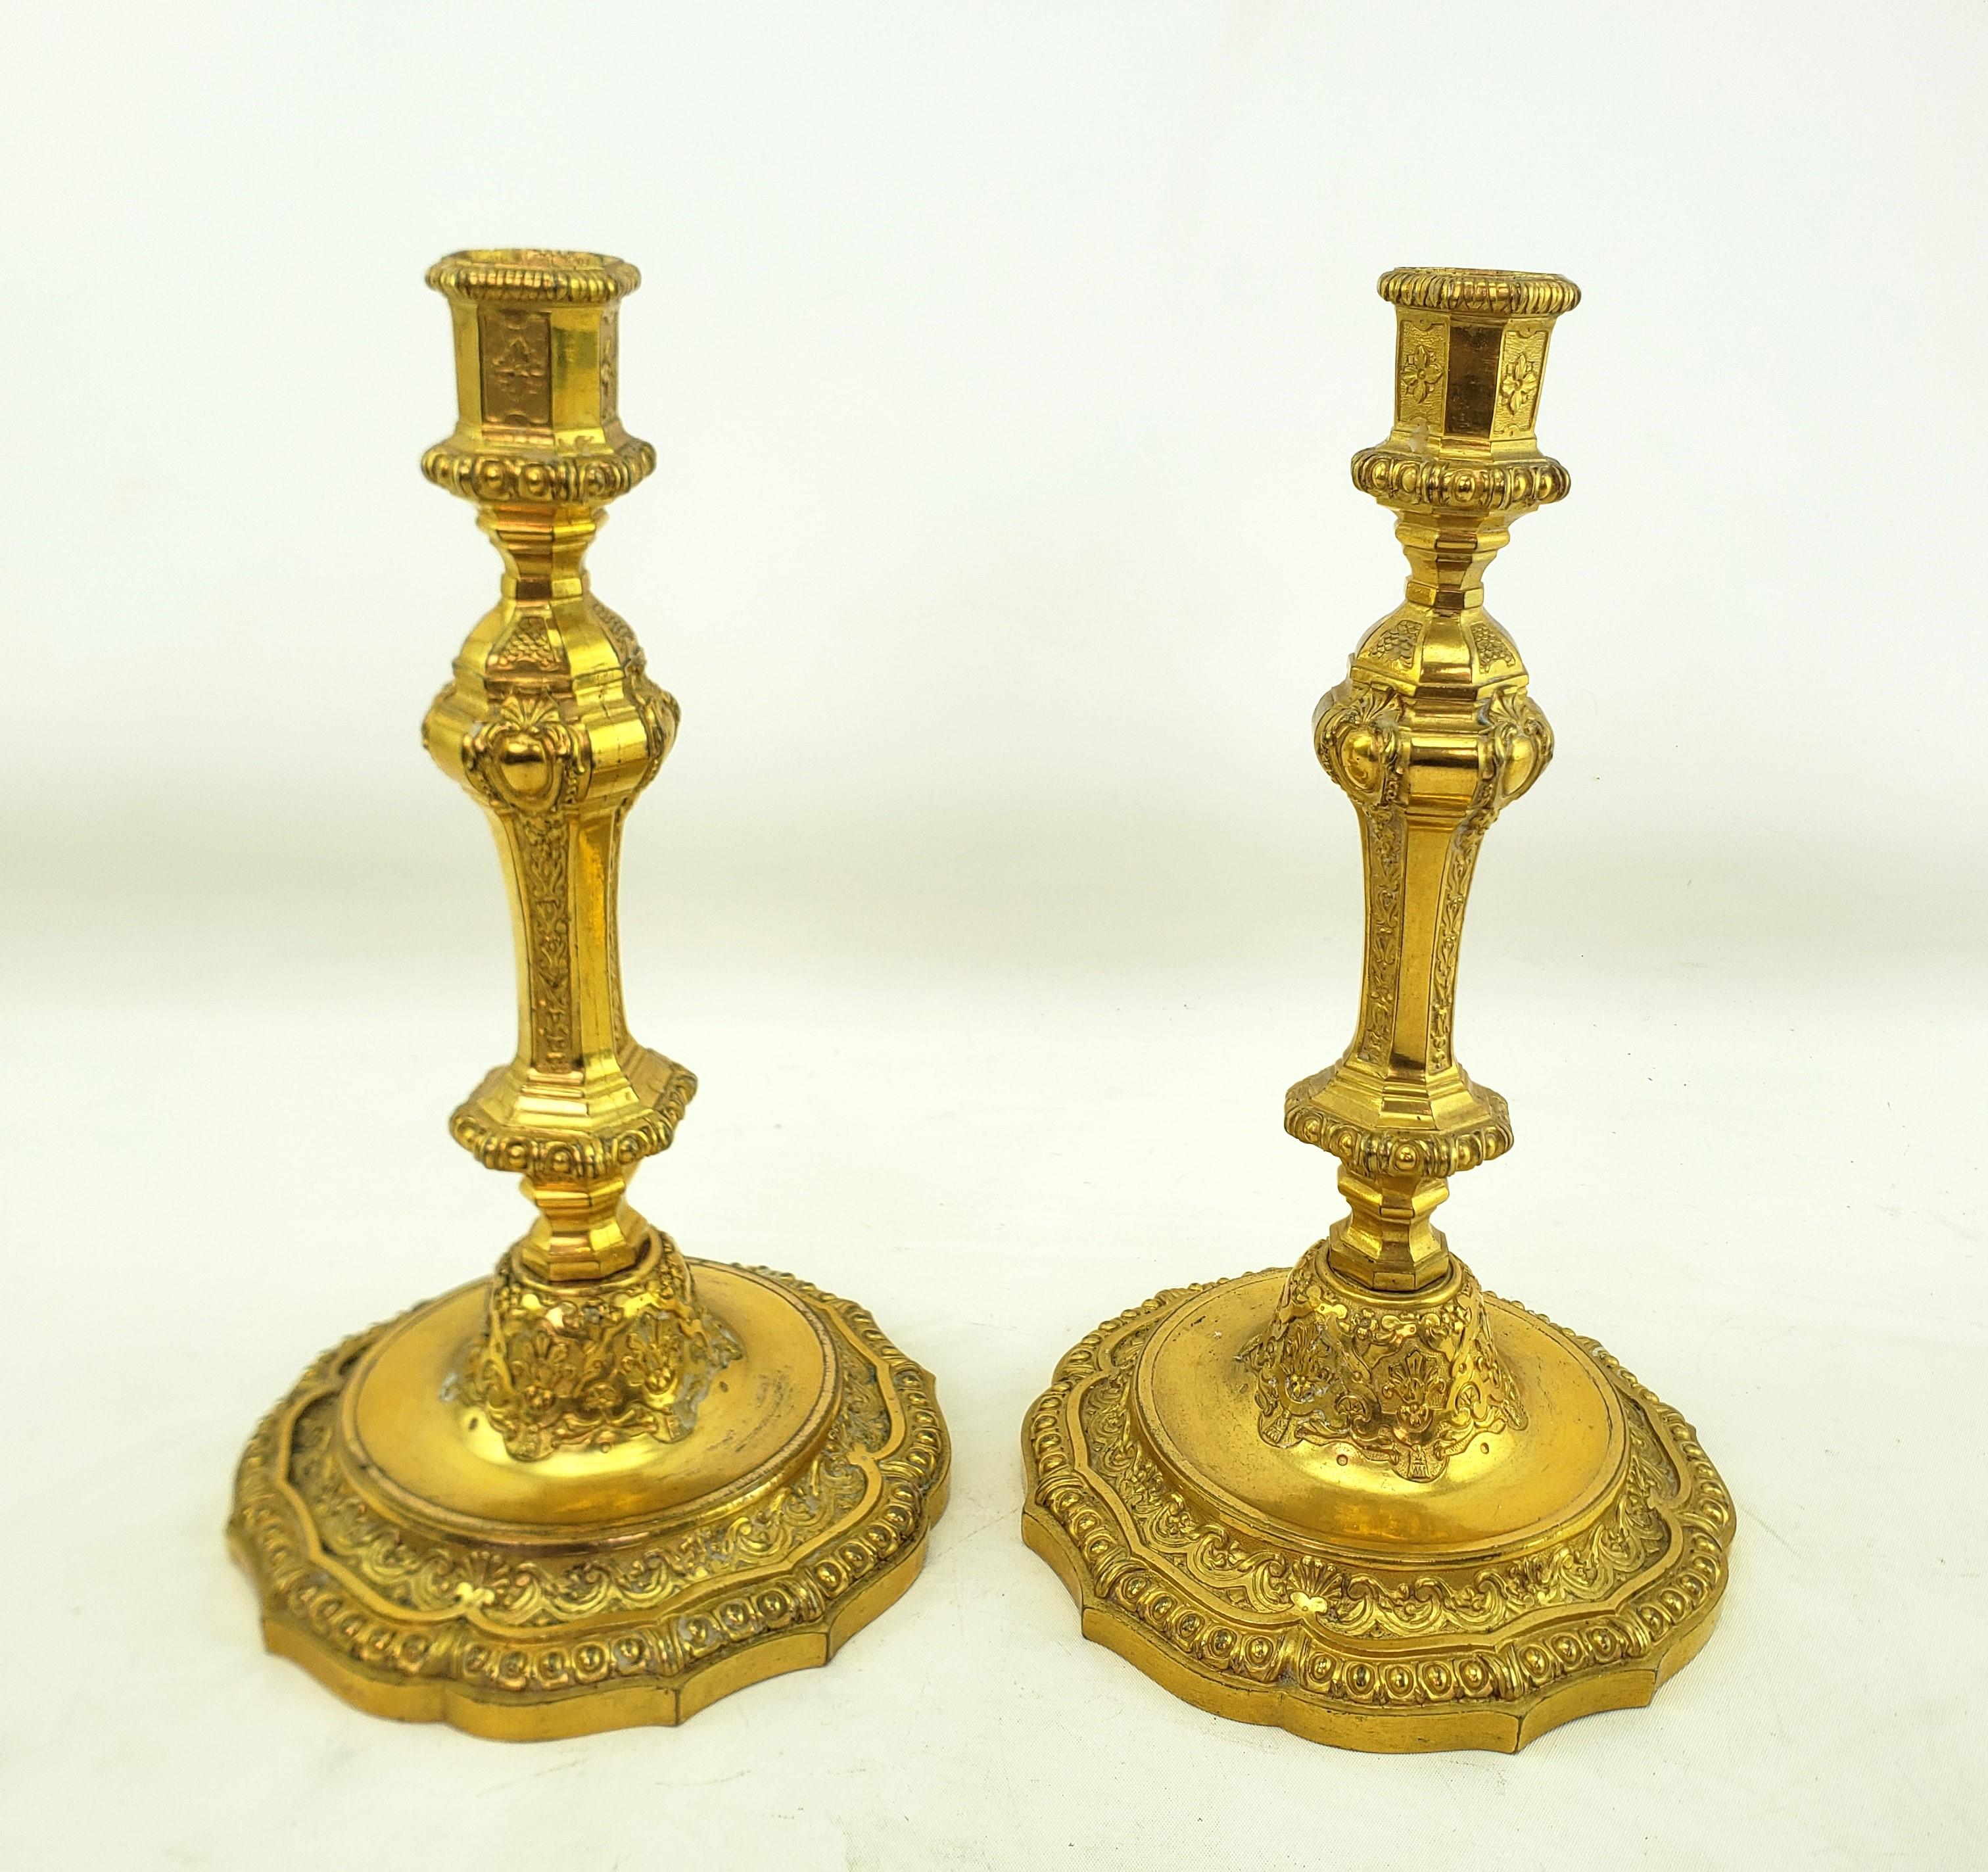 This pair of antique candlesticks are unsigned, but presumed to have originated from France and date to approximately 1880 and done in a Louis XIV style. The candlesticks are composed of ornately cast bronze with decorative stylized flowers and